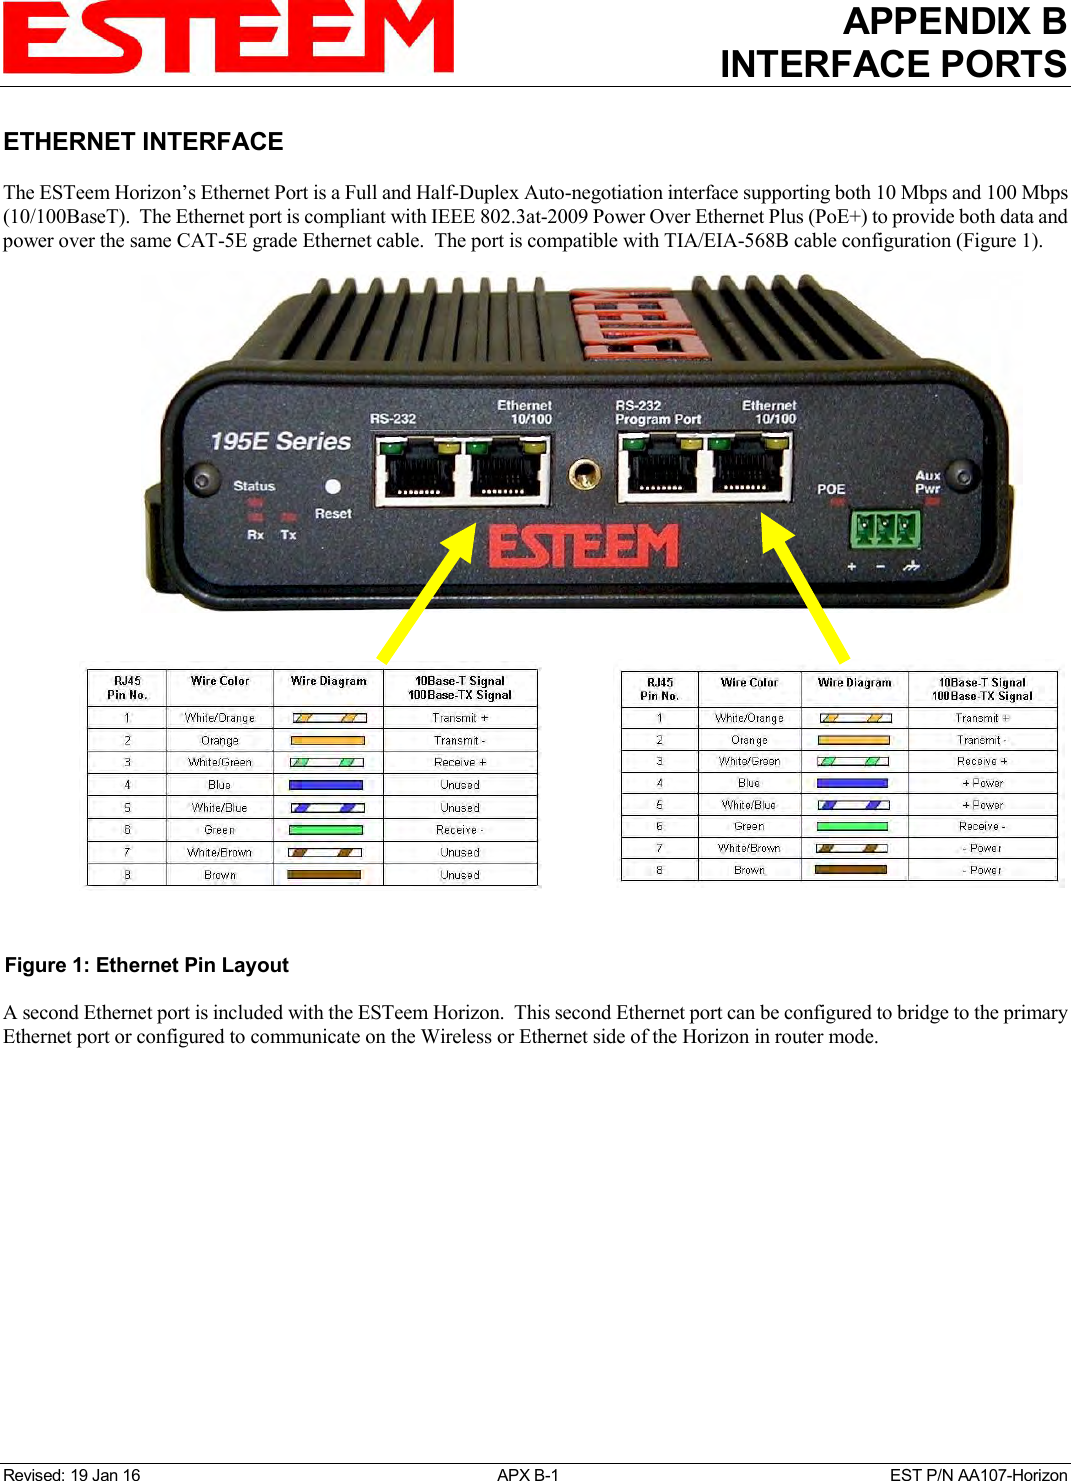 APPENDIX B INTERFACE PORTS   Revised: 19 Jan 16  APX B-1  EST P/N AA107-Horizon ETHERNET INTERFACE  The ESTeem Horizon’s Ethernet Port is a Full and Half-Duplex Auto-negotiation interface supporting both 10 Mbps and 100 Mbps (10/100BaseT).  The Ethernet port is compliant with IEEE 802.3at-2009 Power Over Ethernet Plus (PoE+) to provide both data and power over the same CAT-5E grade Ethernet cable.  The port is compatible with TIA/EIA-568B cable configuration (Figure 1).  A second Ethernet port is included with the ESTeem Horizon.  This second Ethernet port can be configured to bridge to the primary Ethernet port or configured to communicate on the Wireless or Ethernet side of the Horizon in router mode.  Figure 1: Ethernet Pin Layout   